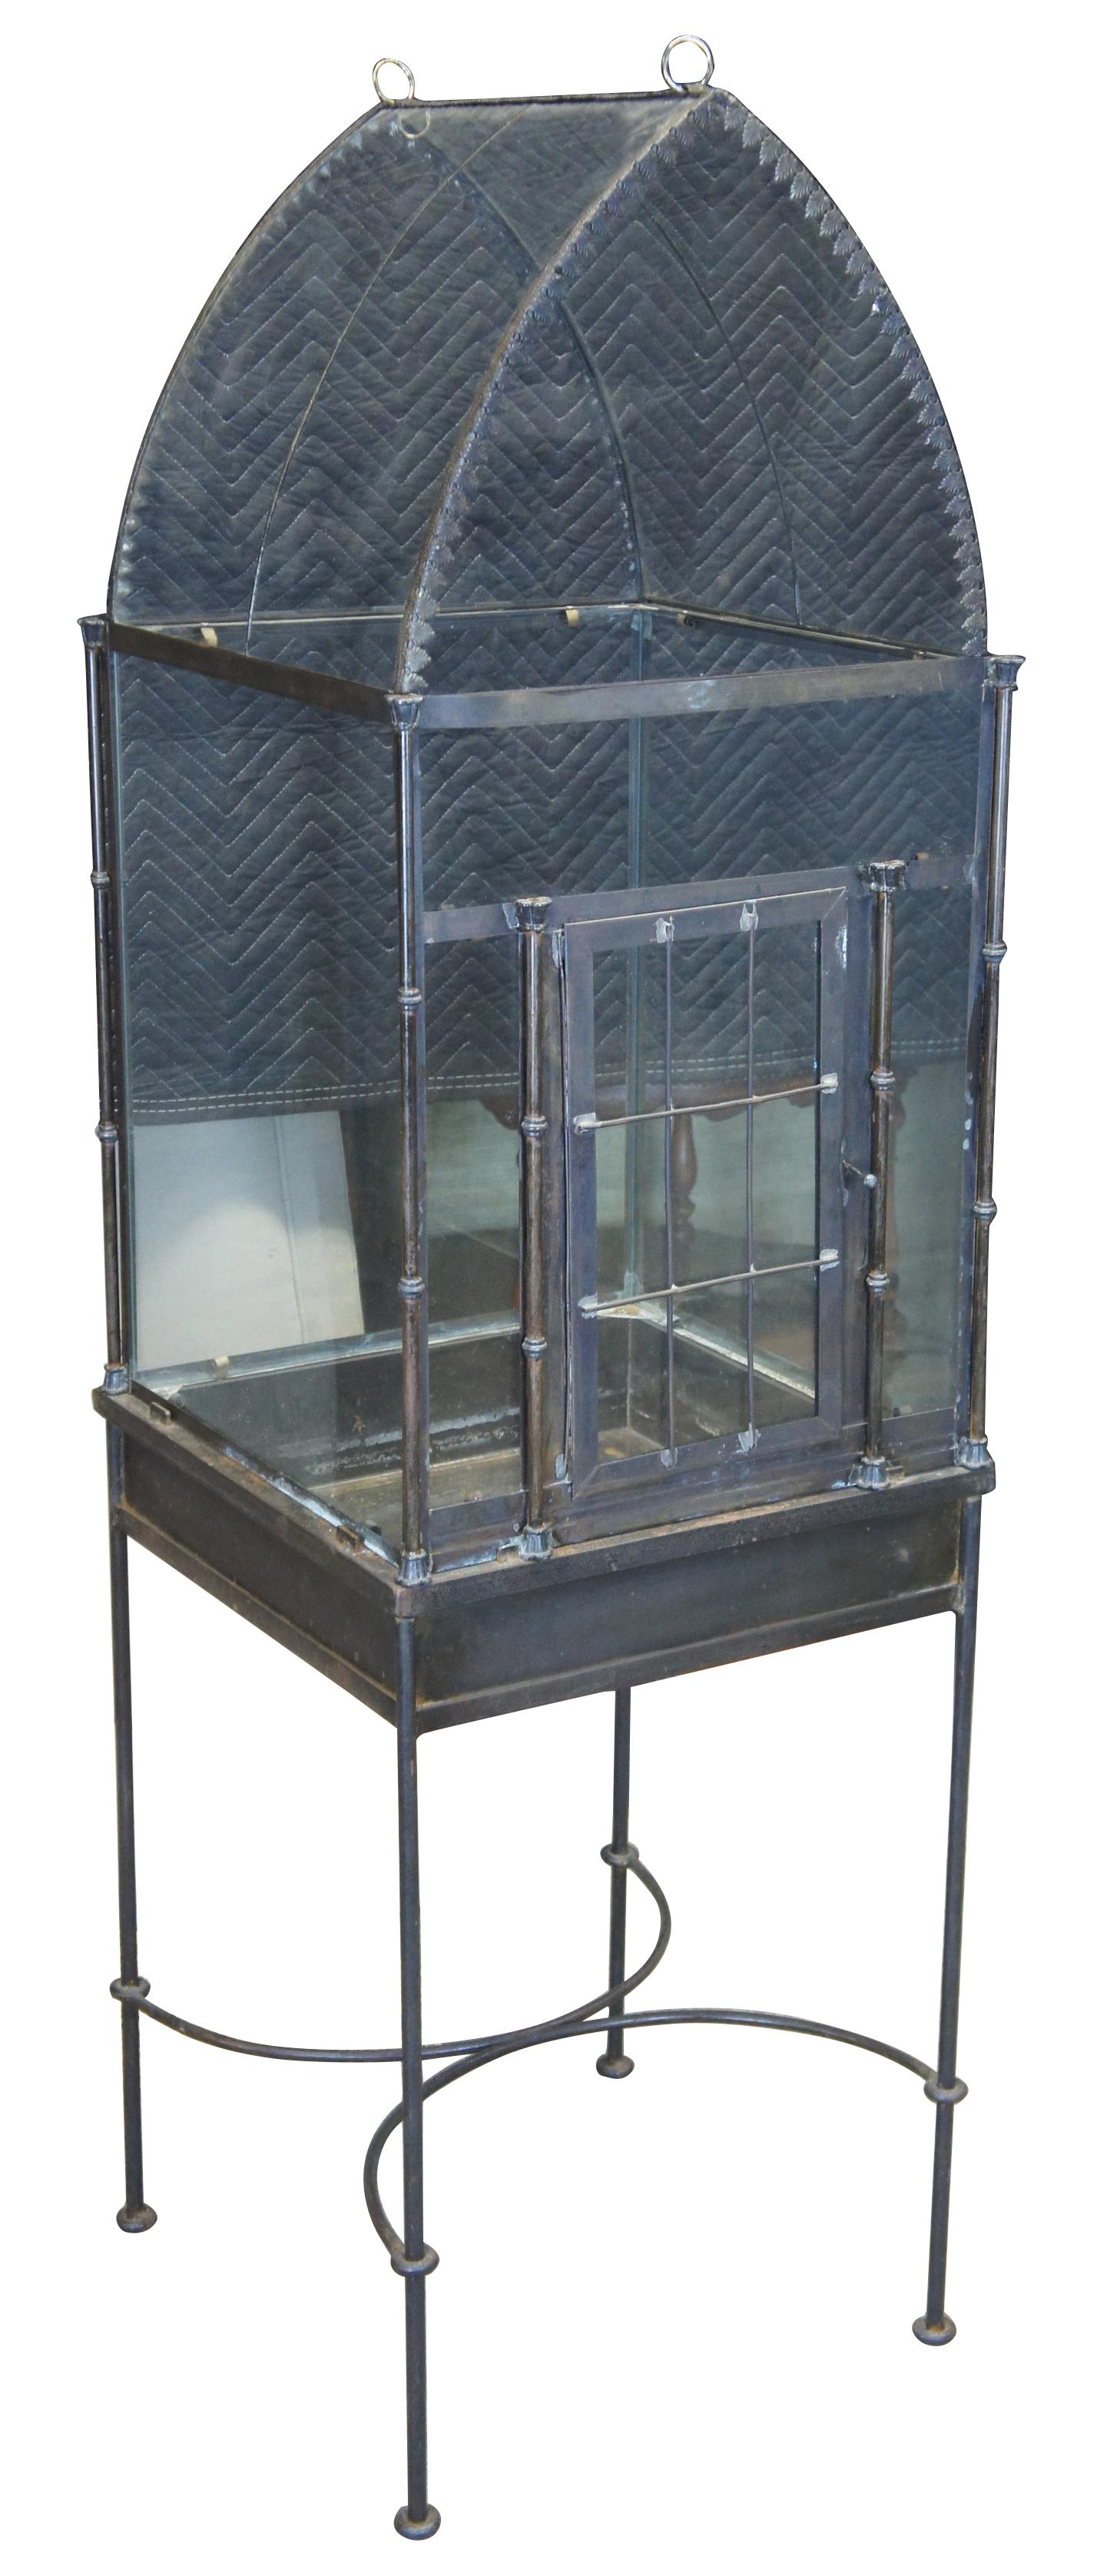 Victorian or Gothic inspired iron and glass terrarium on stand. Features dome top with door on front for access. Measures: 62”.
  